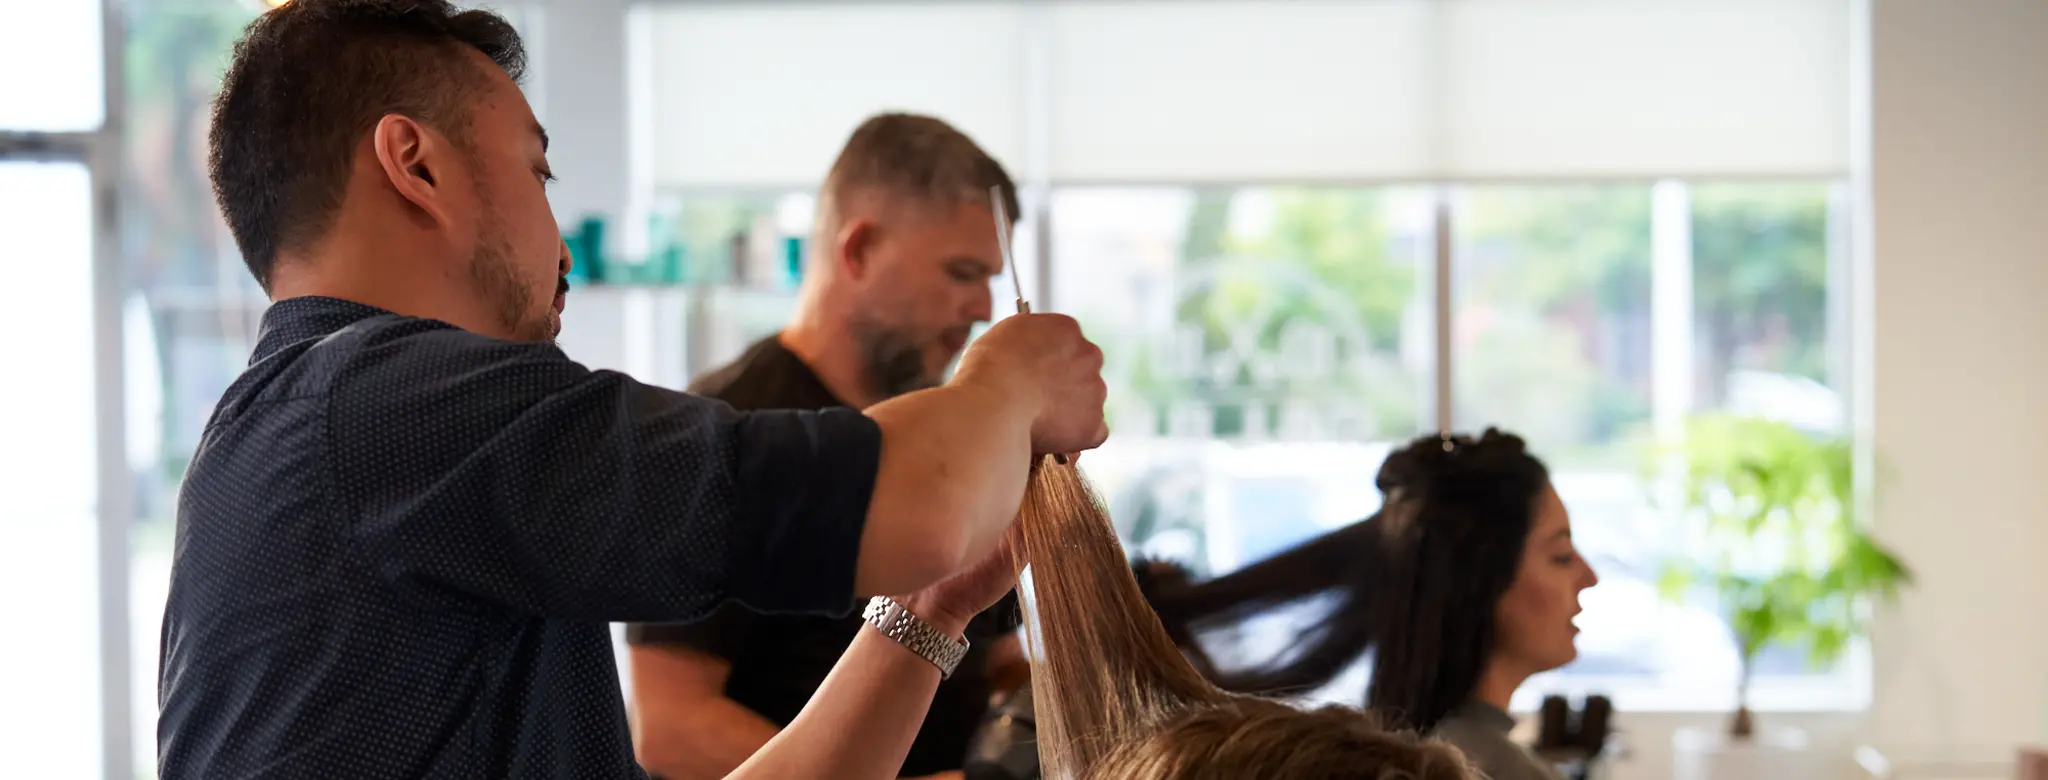 two women getting haircuts in salon by male hair stylists